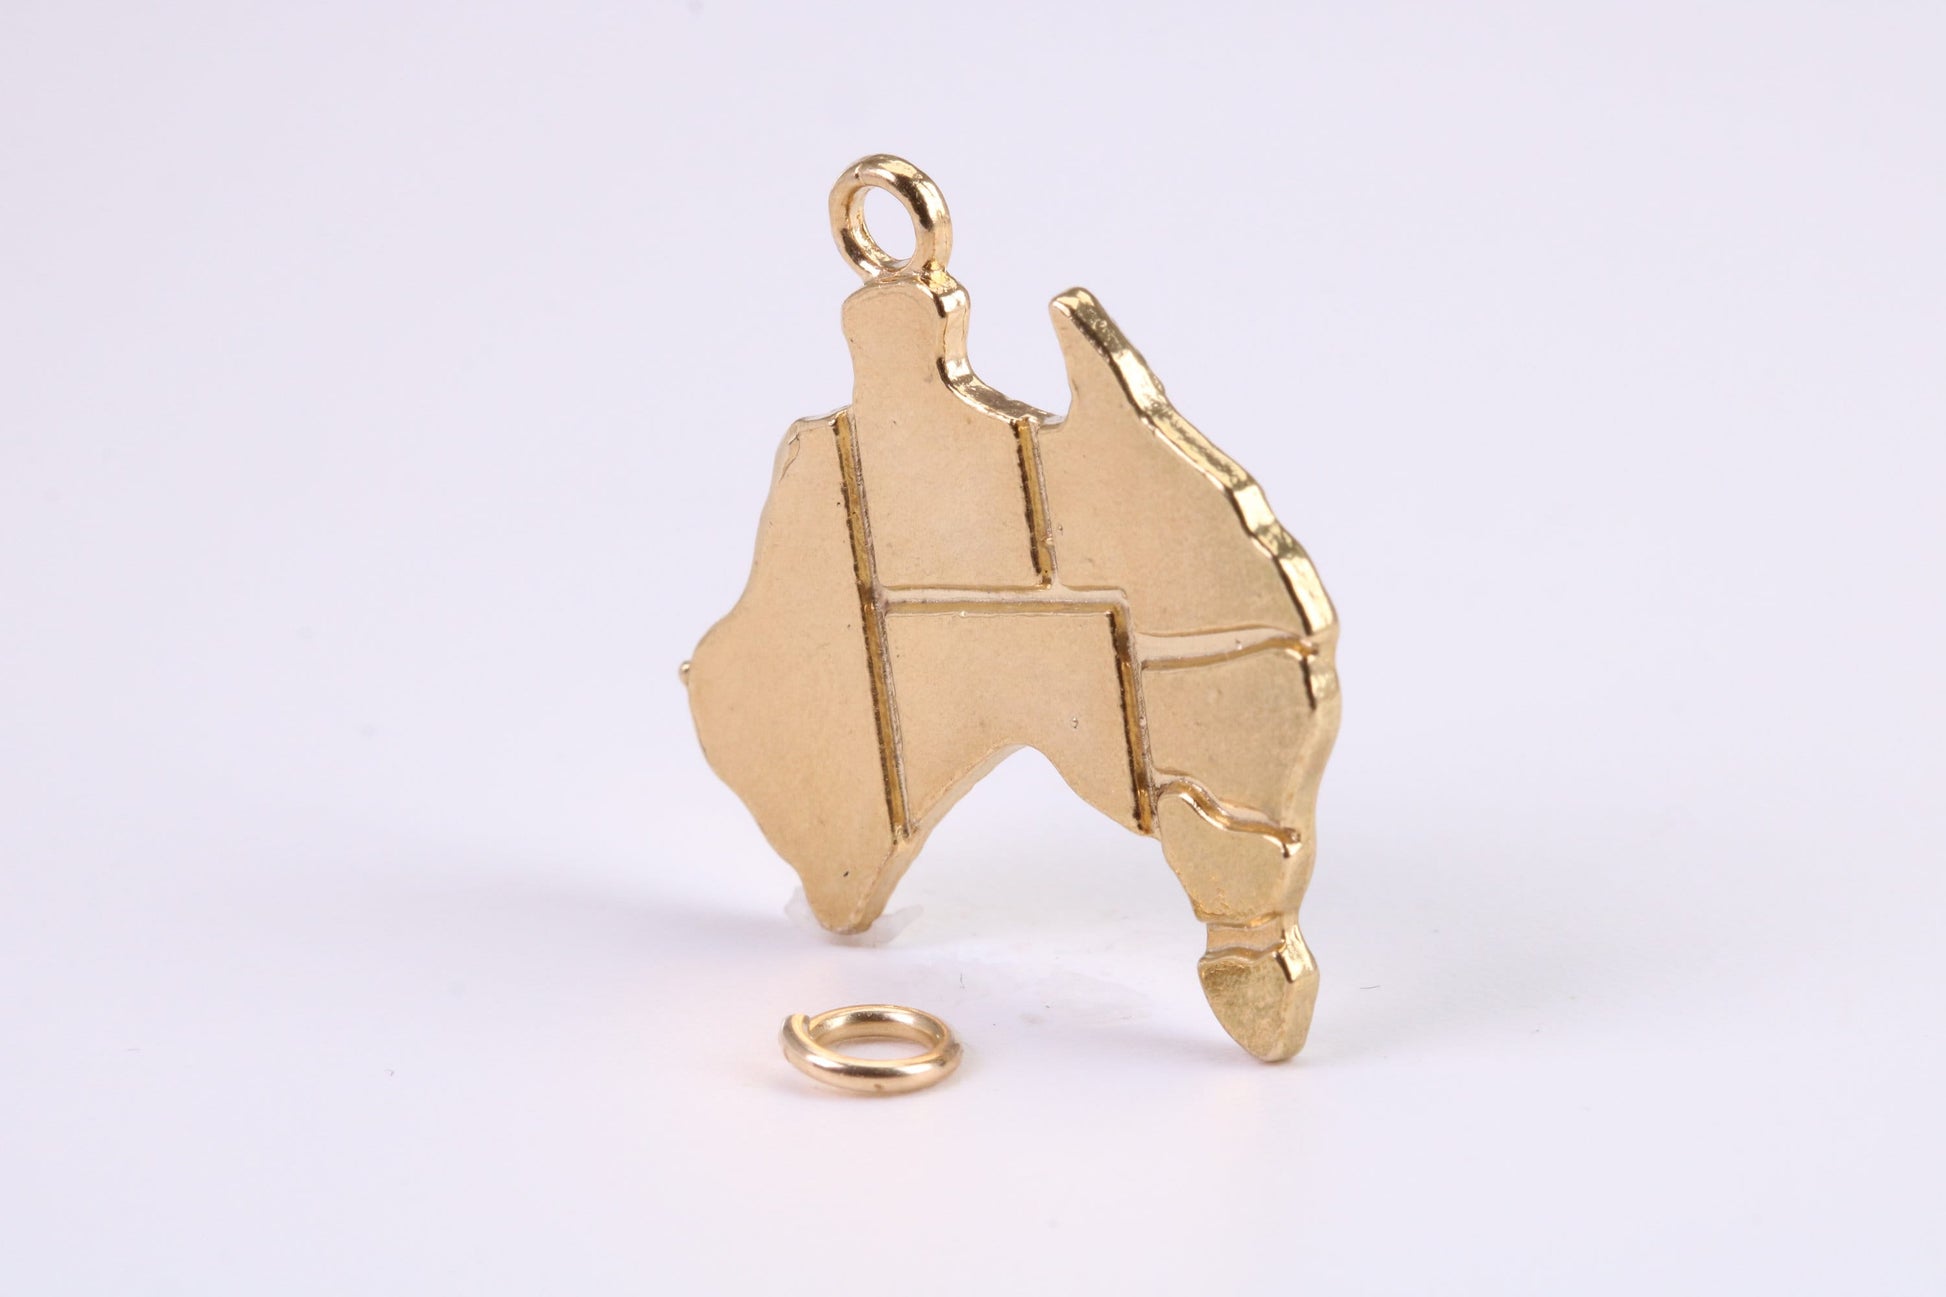 Australia Charm, Traditional Charm, Made from Solid Yellow Gold, British Hallmarked, Complete with Attachment Link